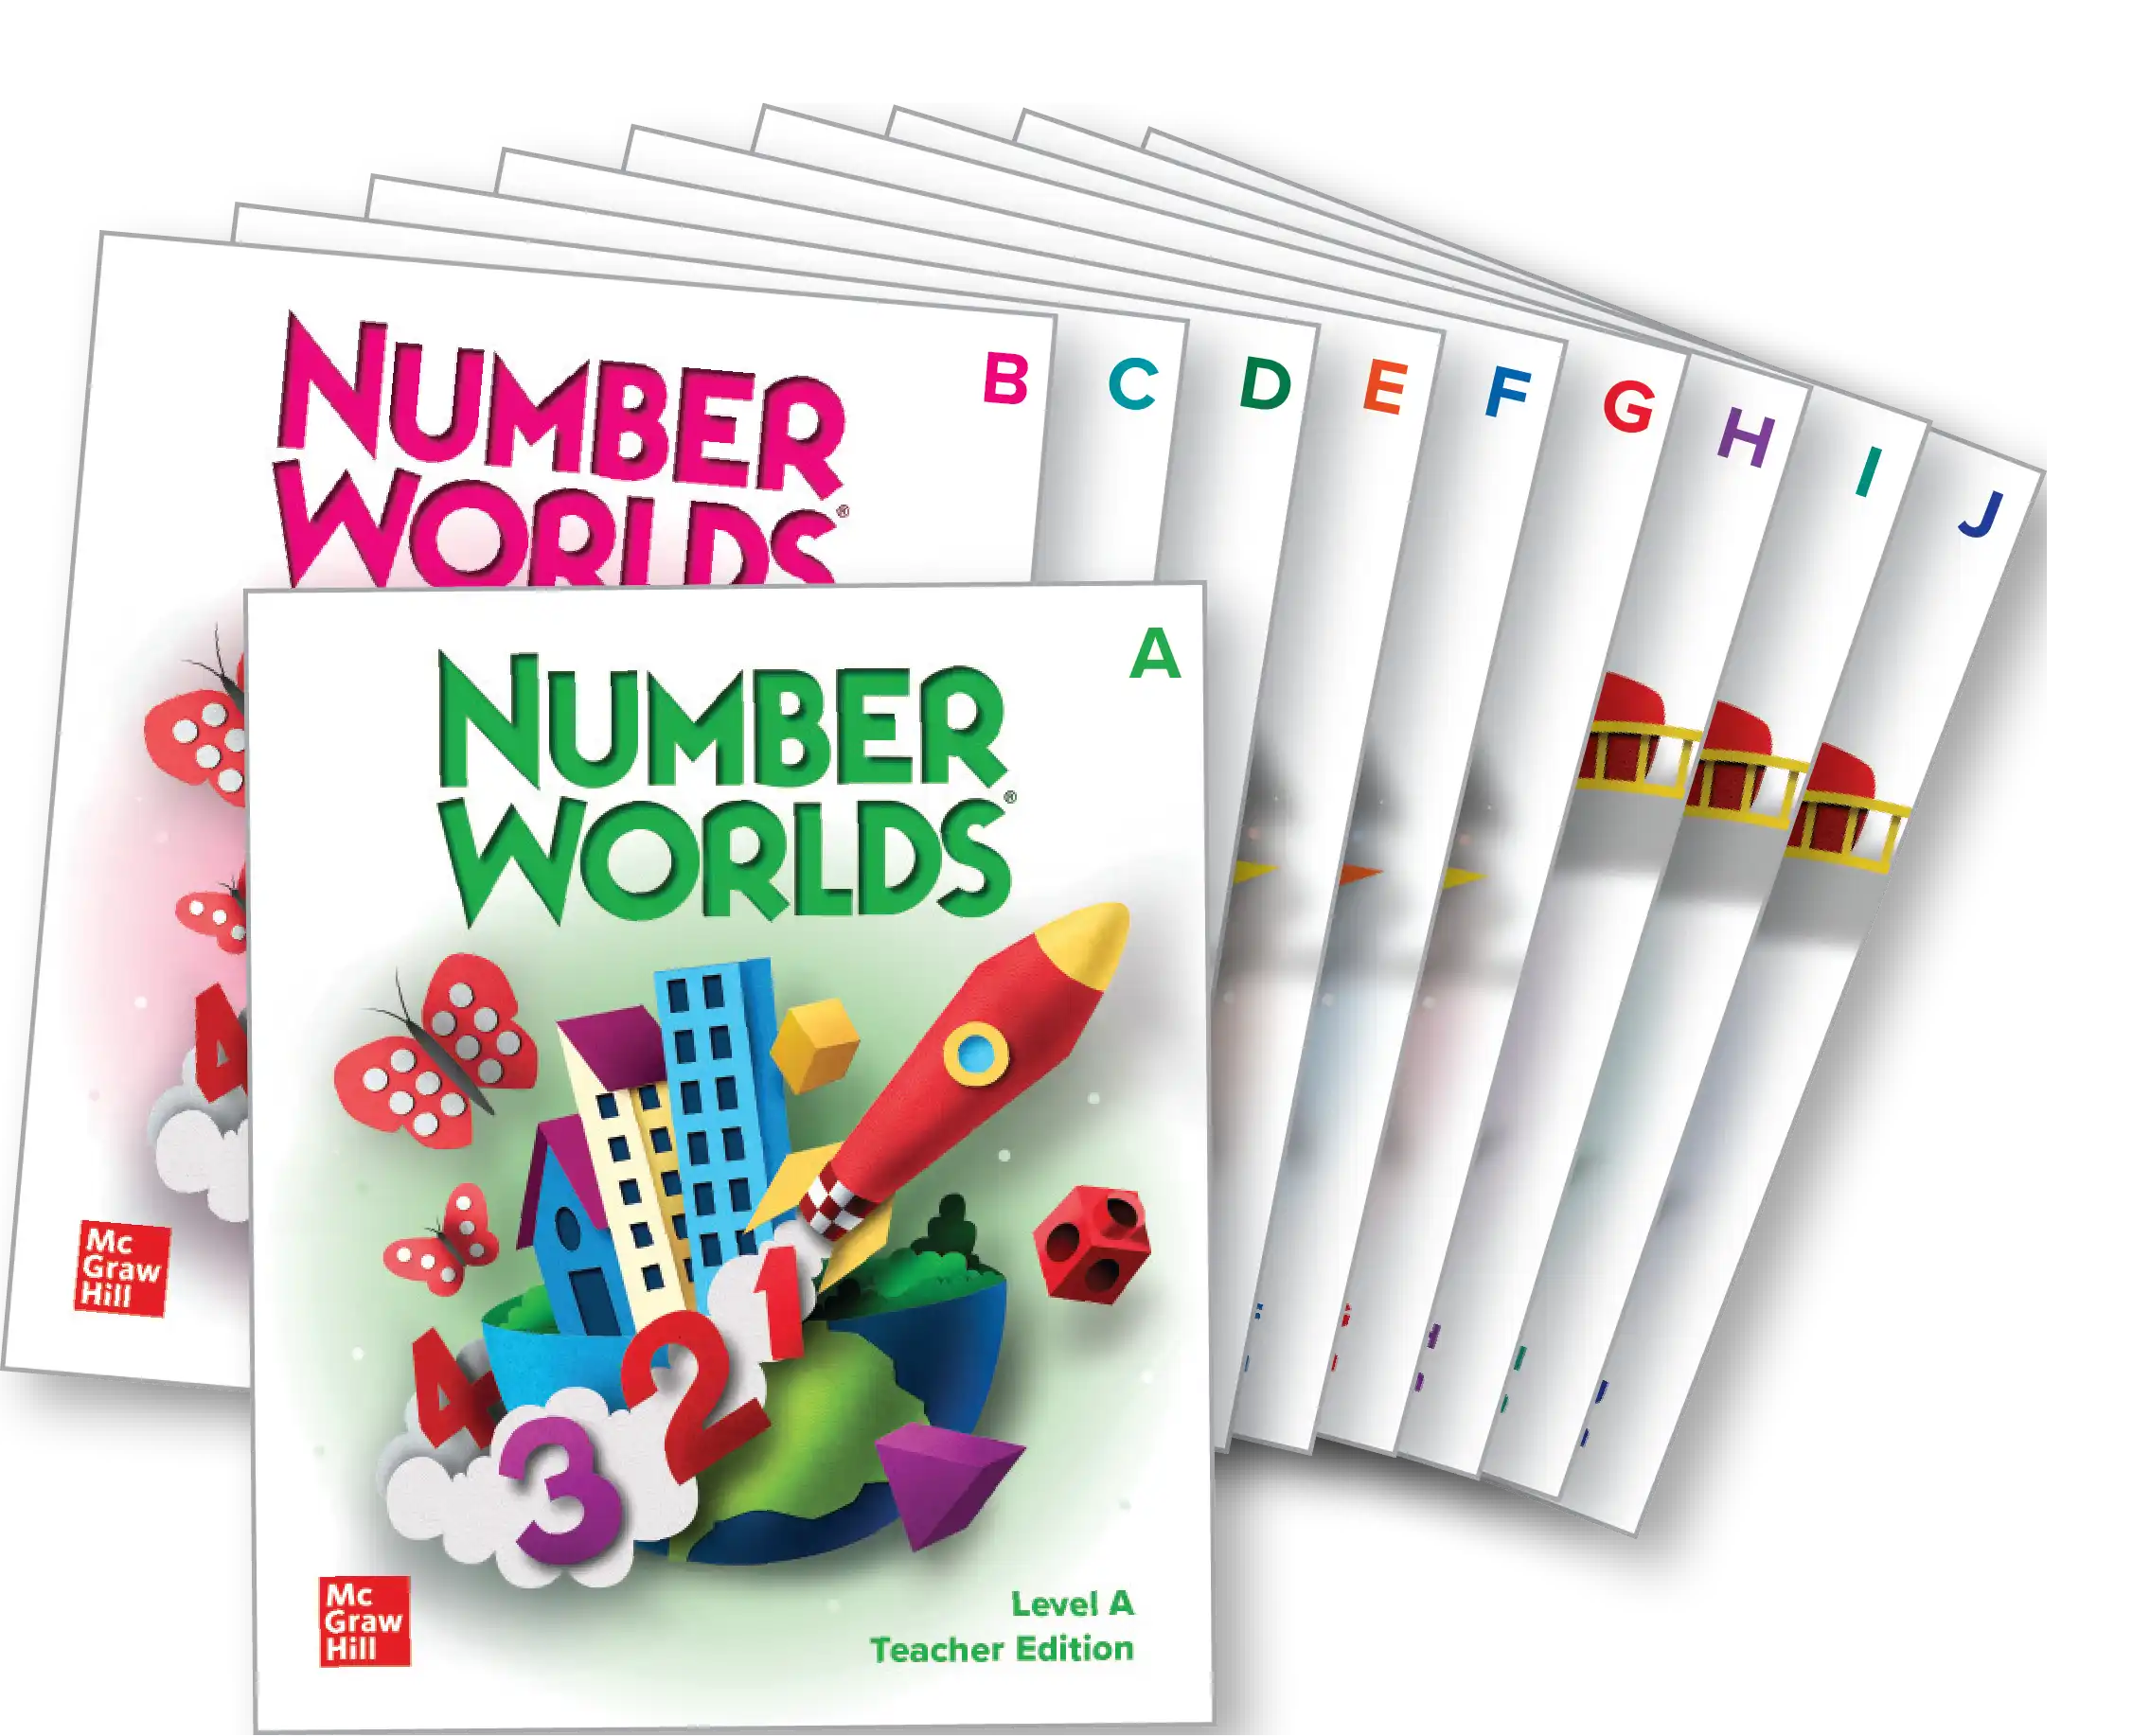 Number Worlds Teacher Edition covers Levels A-J